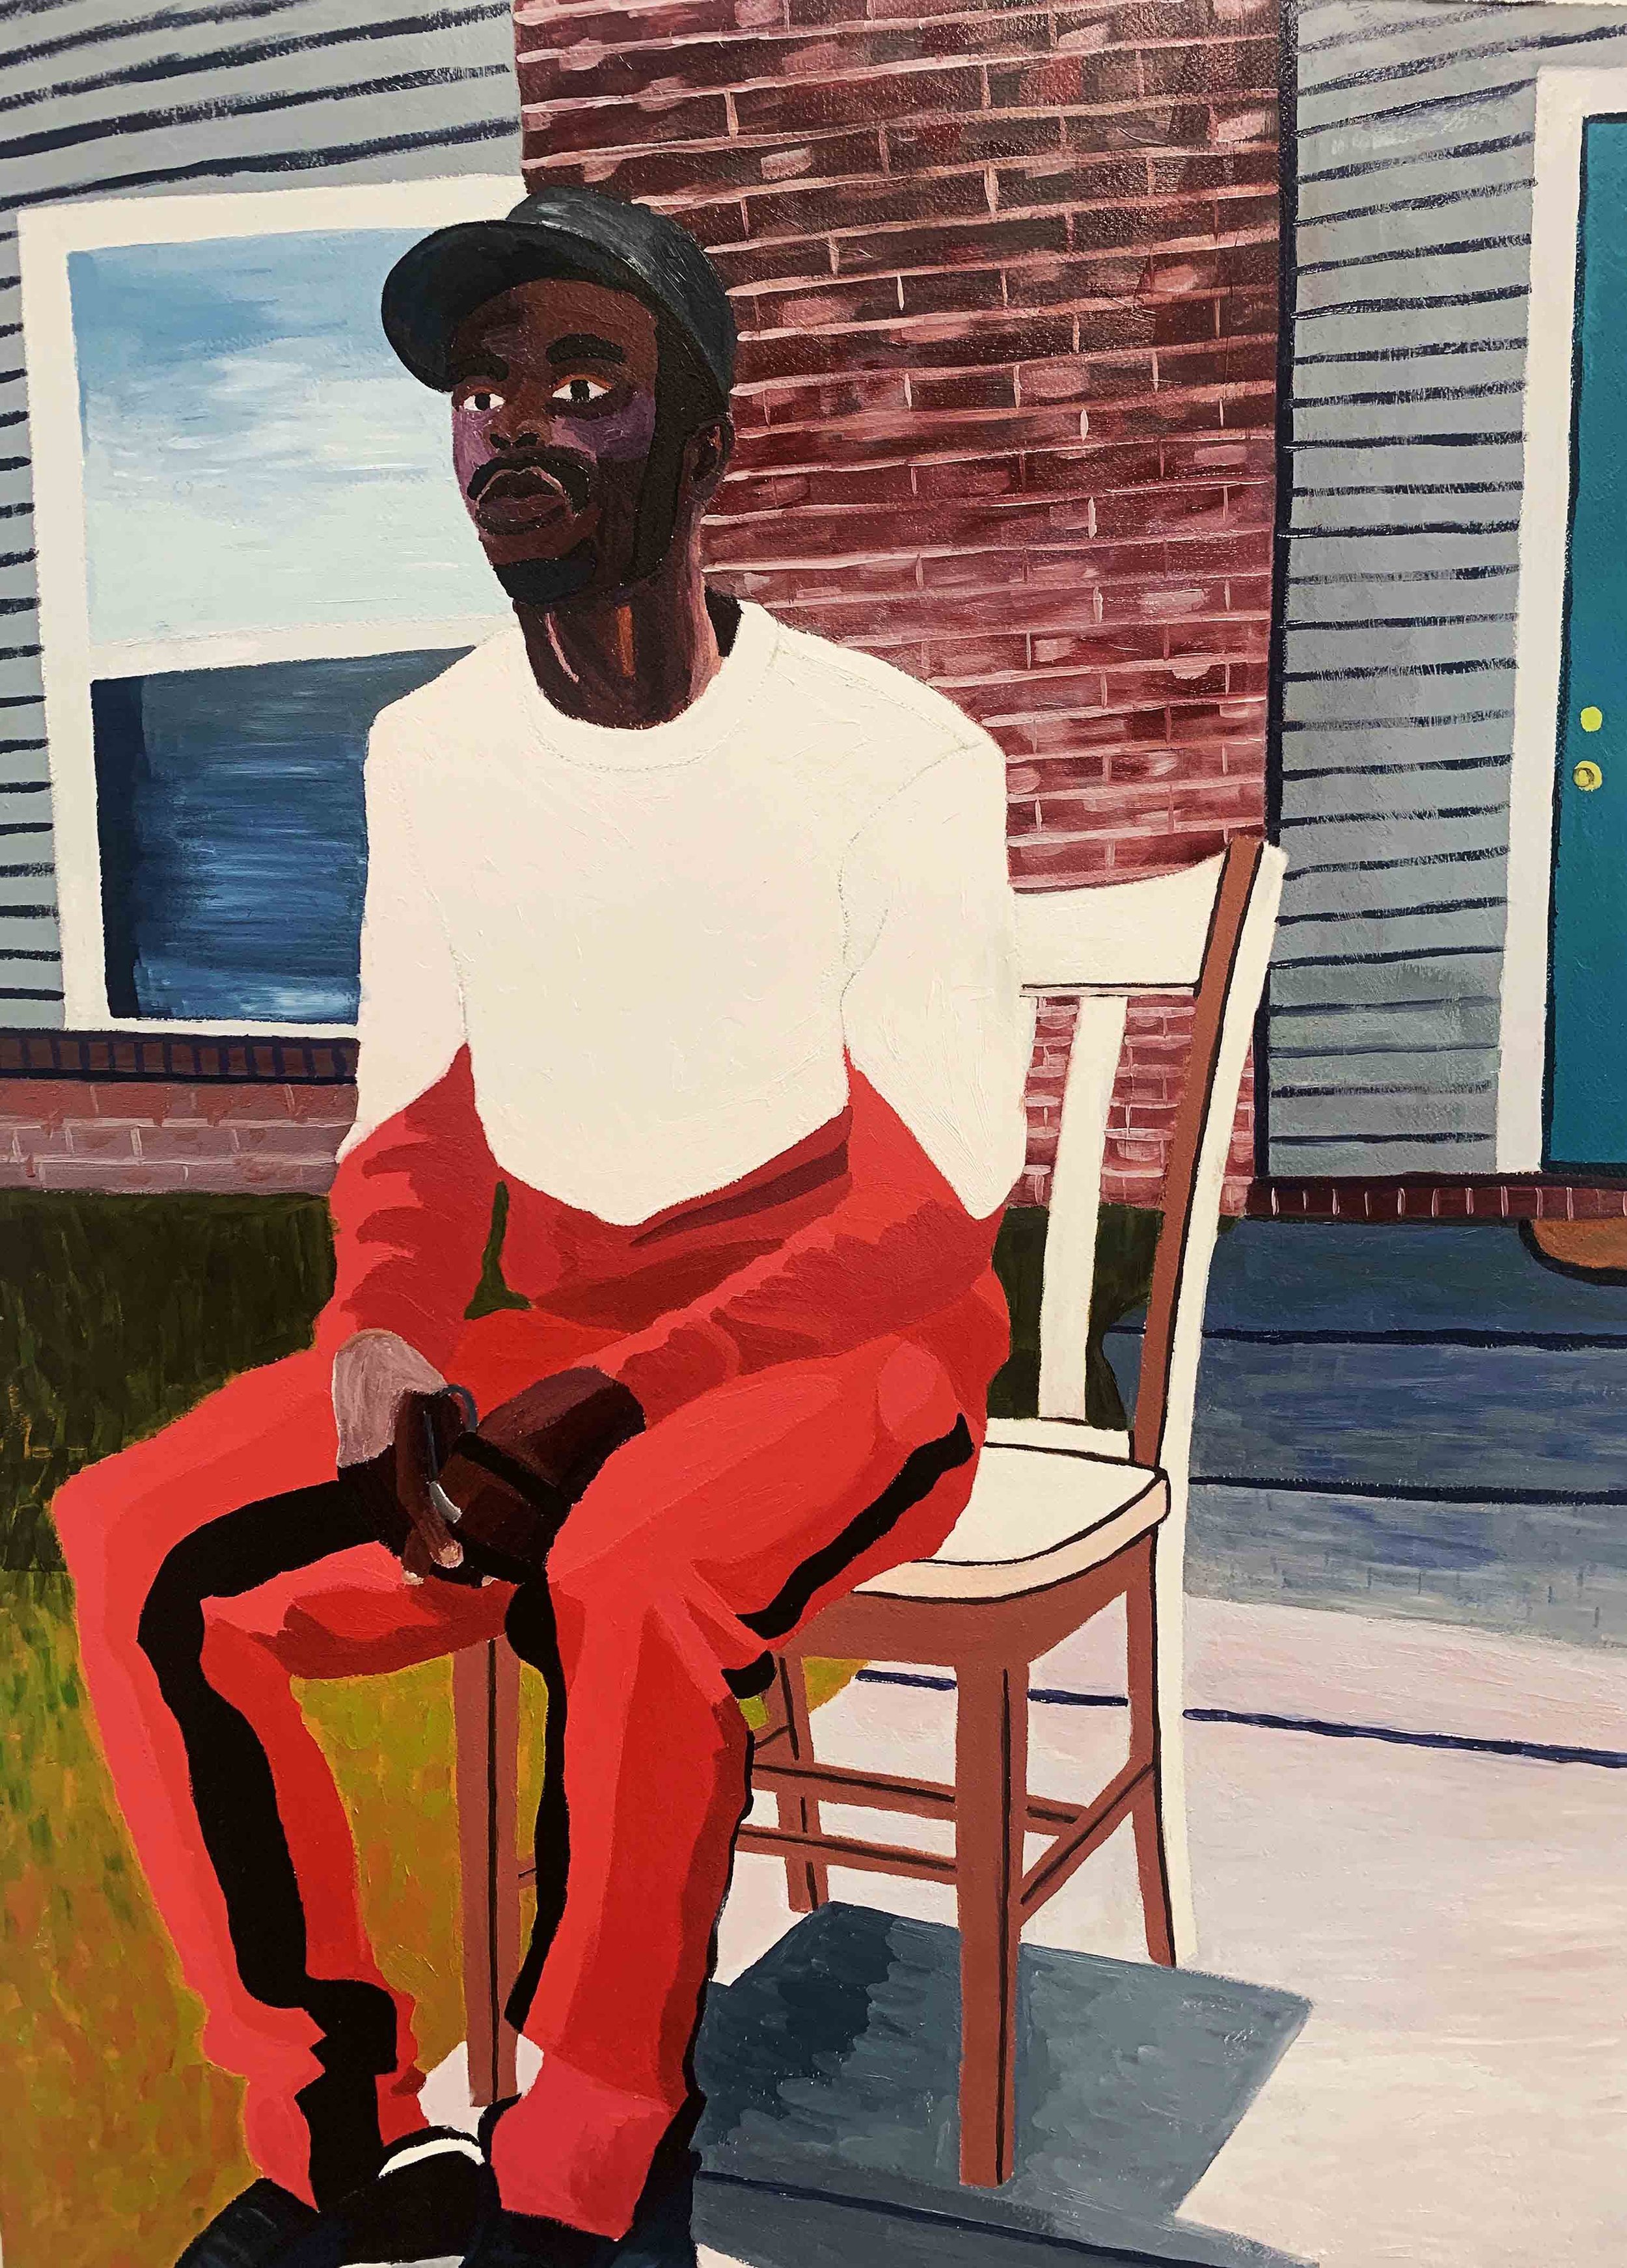    Kicked Out  , 43” x 24”, oil on paper 